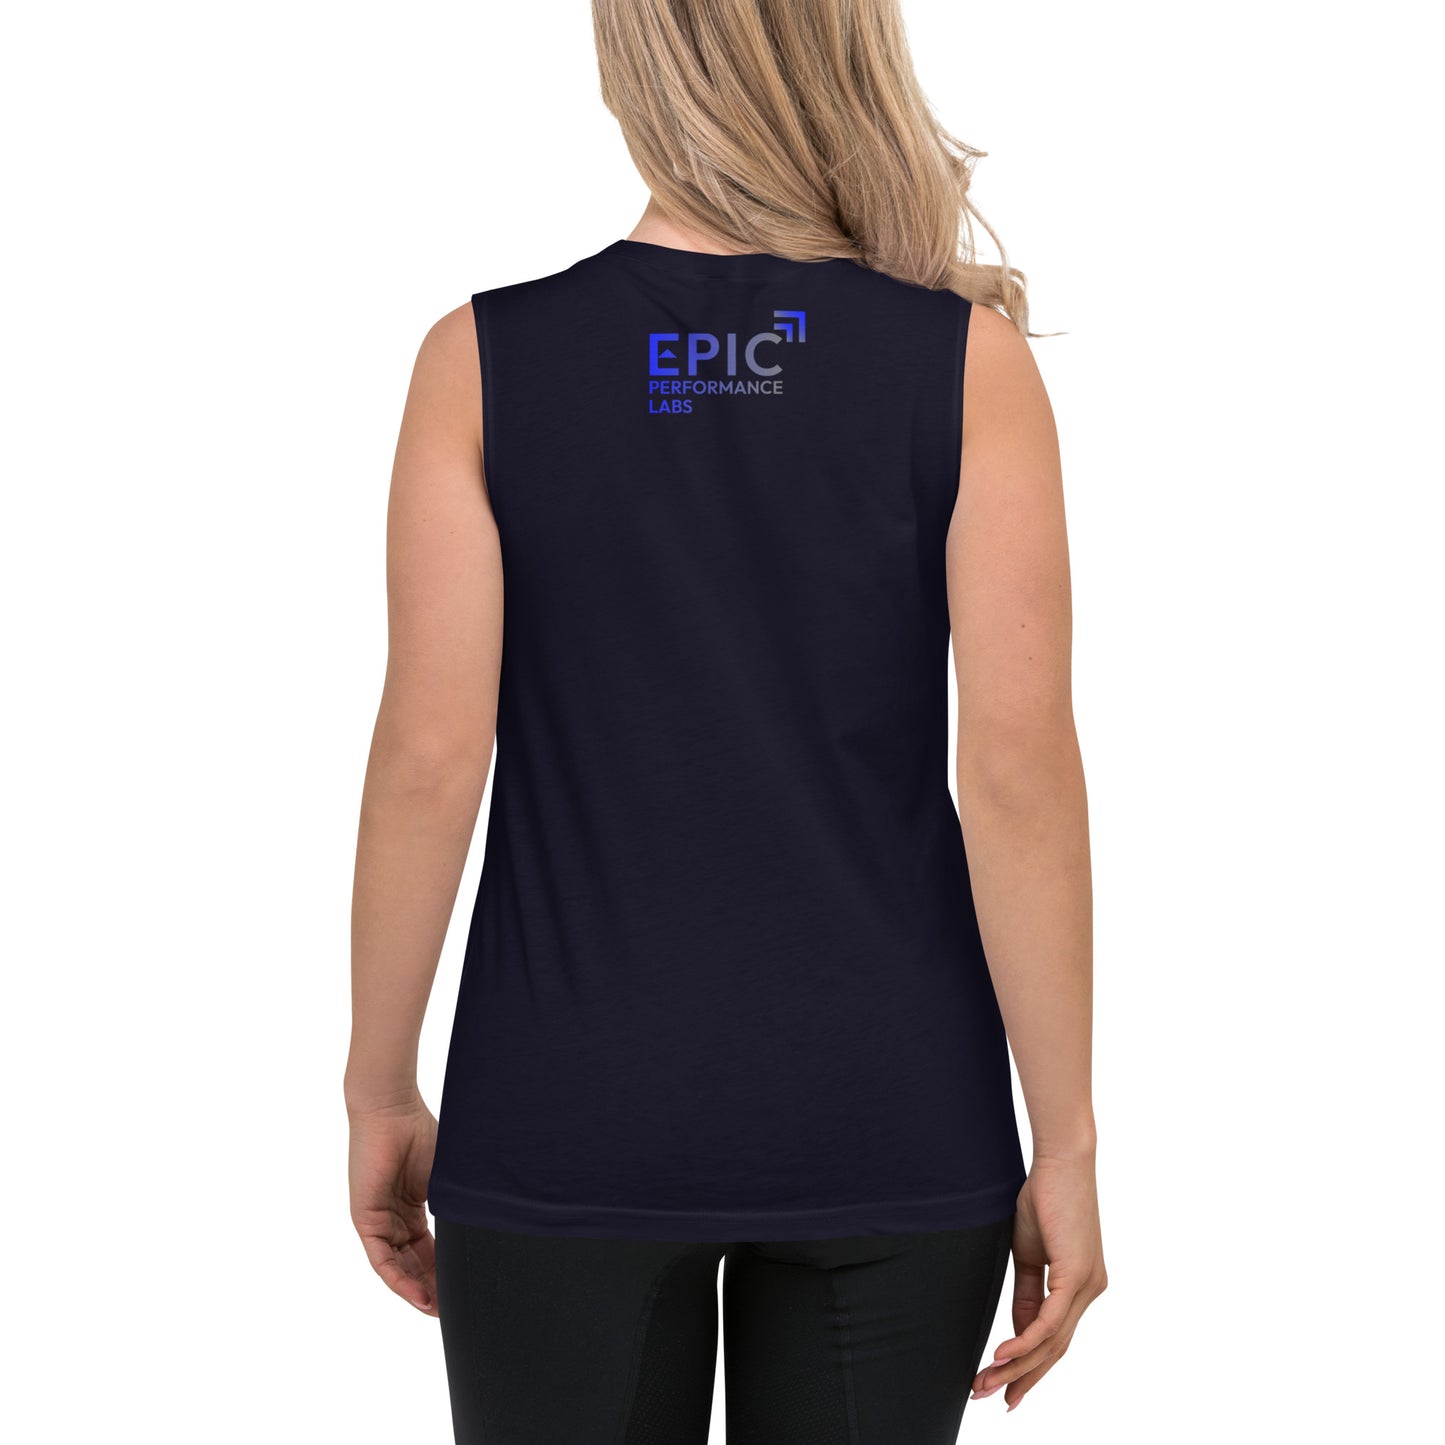 Epic Performance Labs - Muscle Shirt